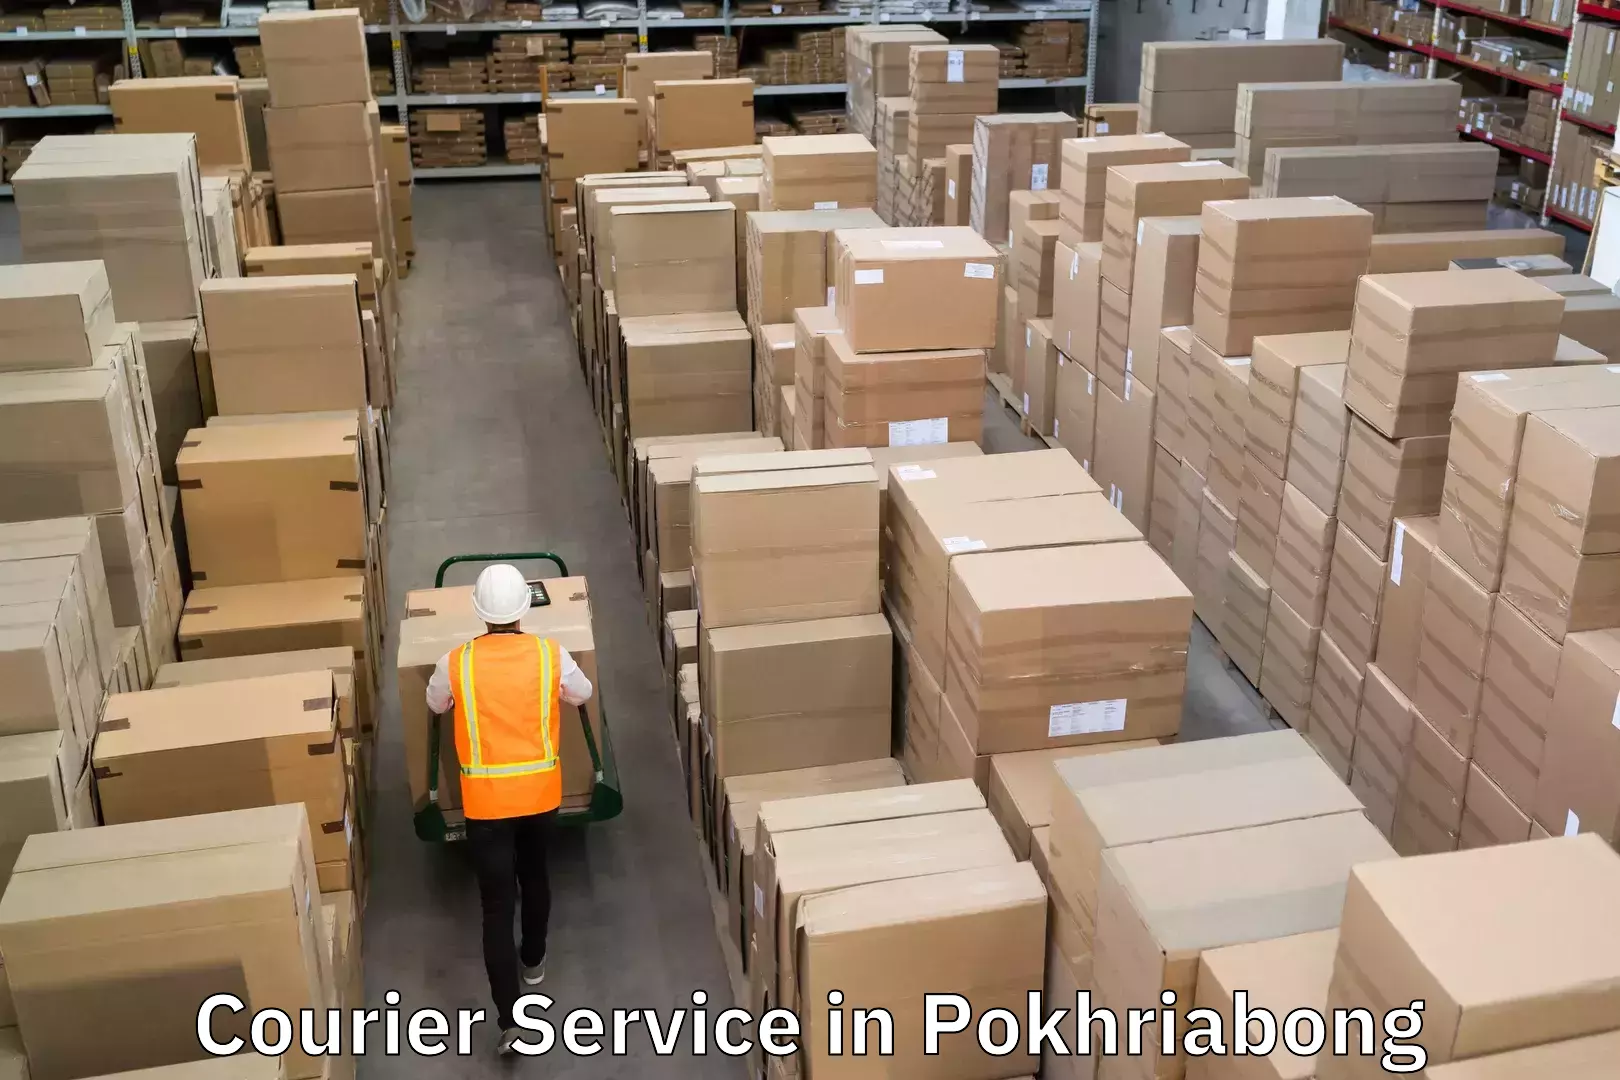 Rapid freight solutions in Pokhriabong